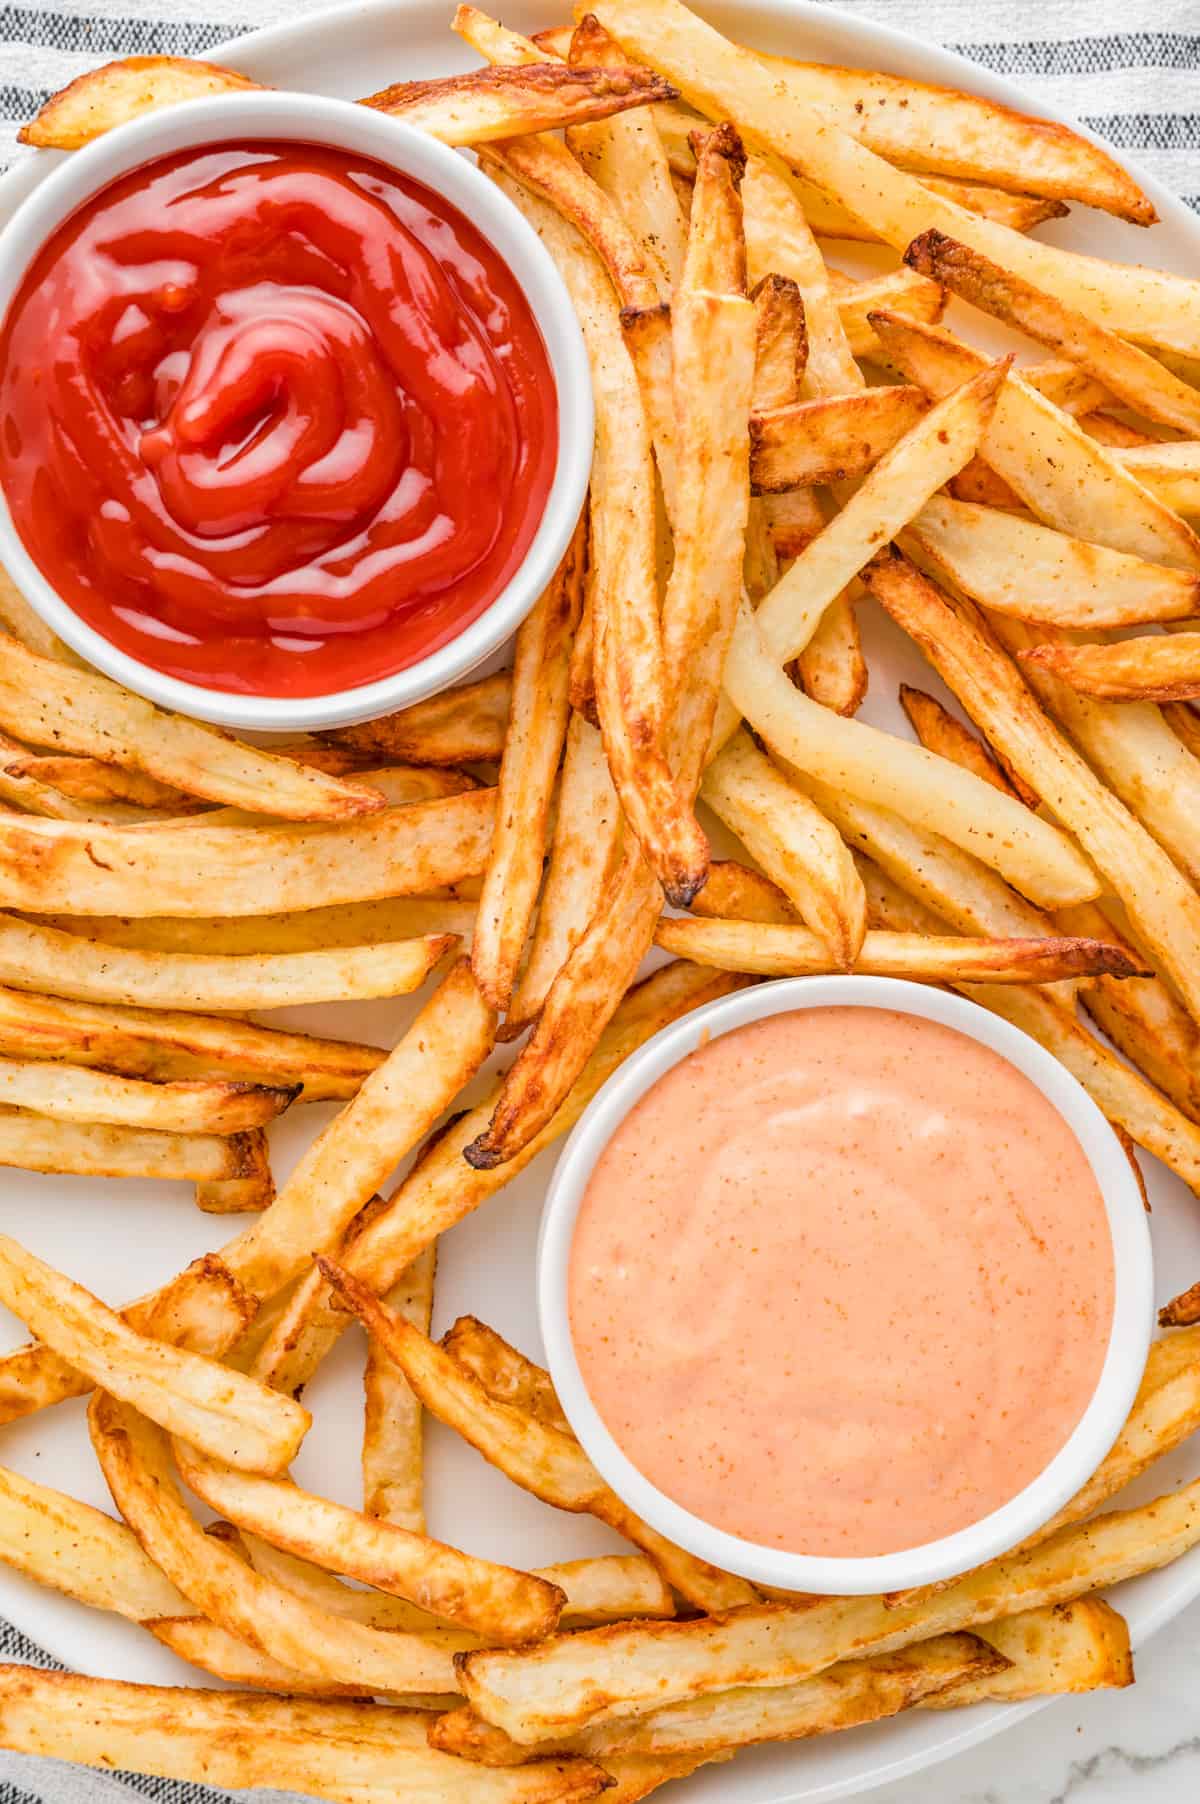 Overhead of fries on white plate with bowls of ketchup and fry sauce.